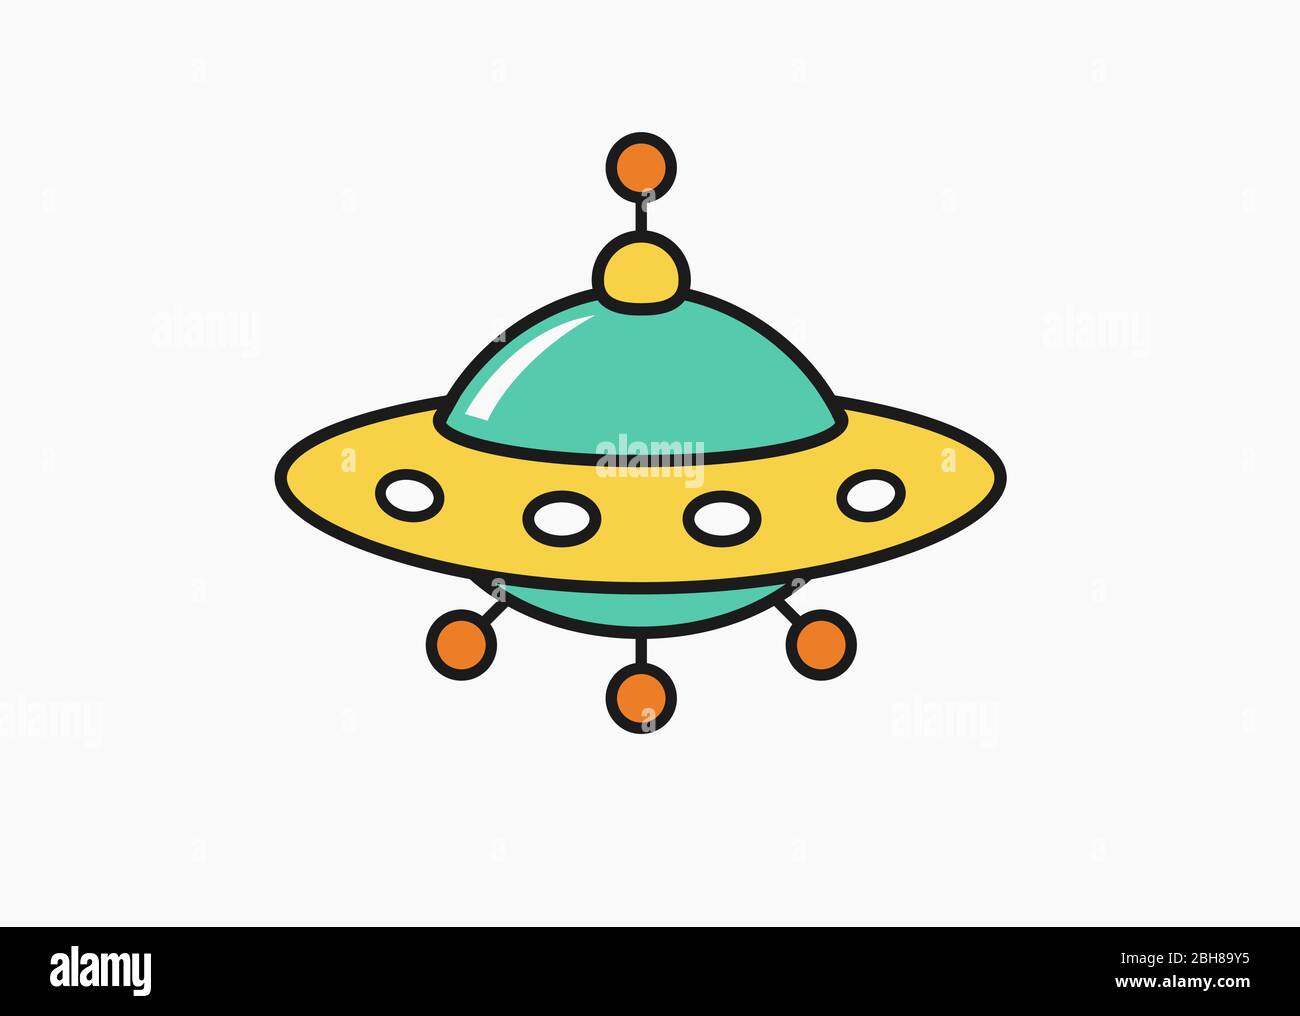 Childs drawing UFO icon, unknow flying object cartoon linear ...